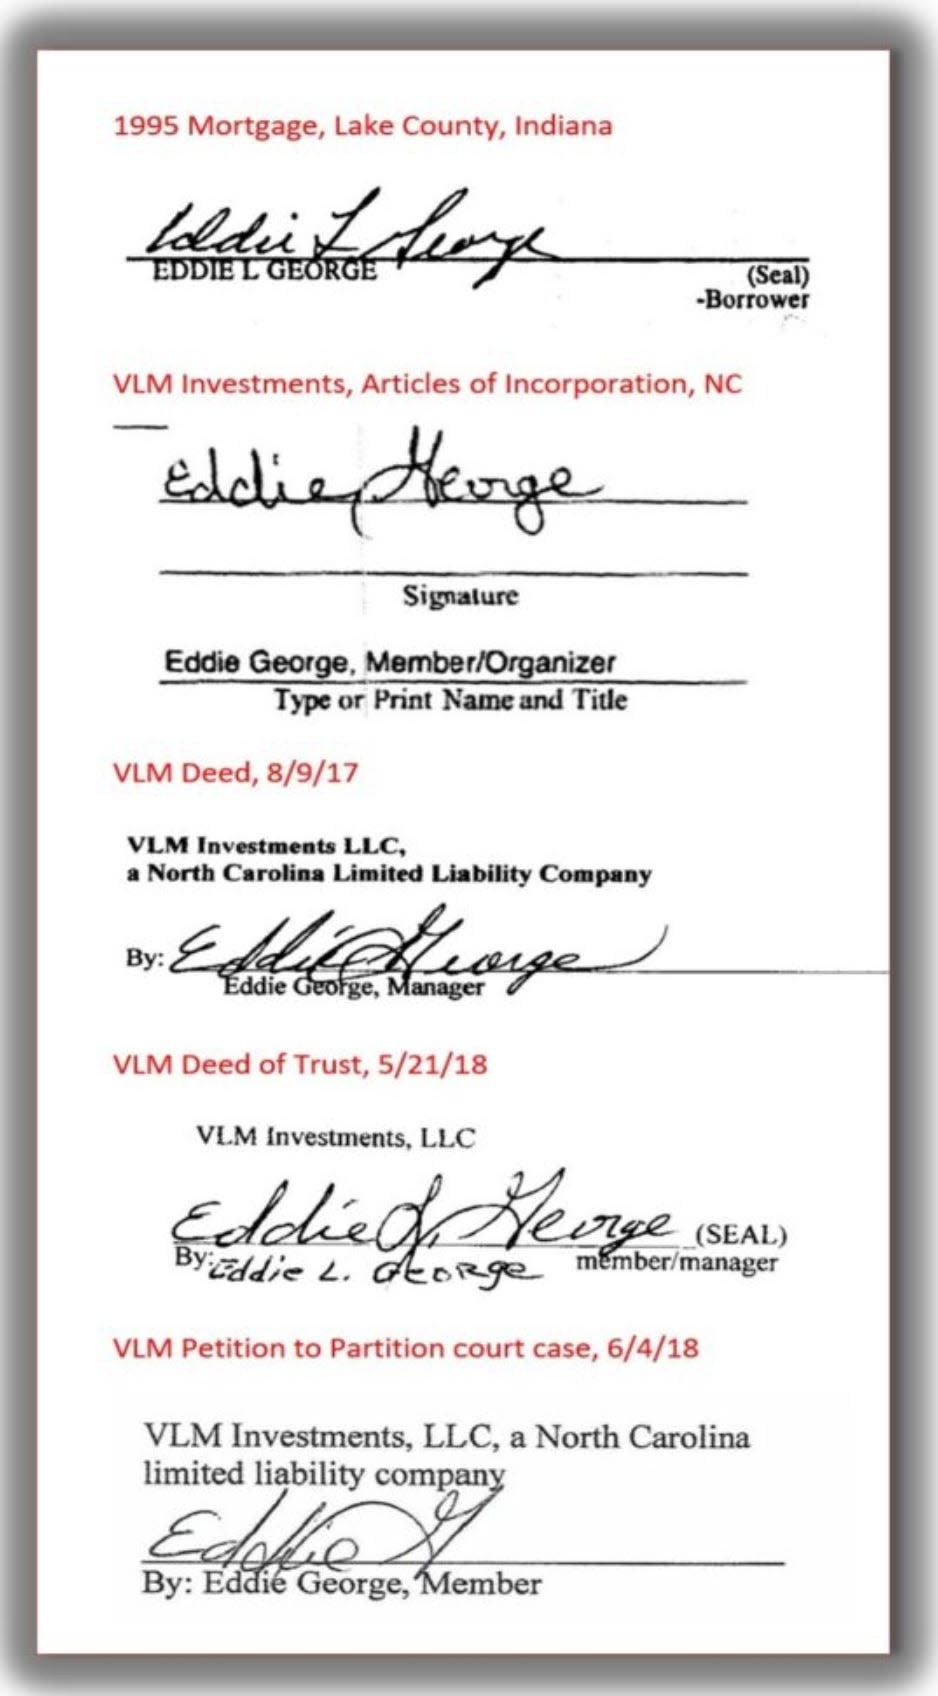 Comparing signatures: Top, Eddie George’s verified signature from Indiana. He says he had no knowledge of VLM Investments and did not sign the legal documents notarized and recorded in his name.